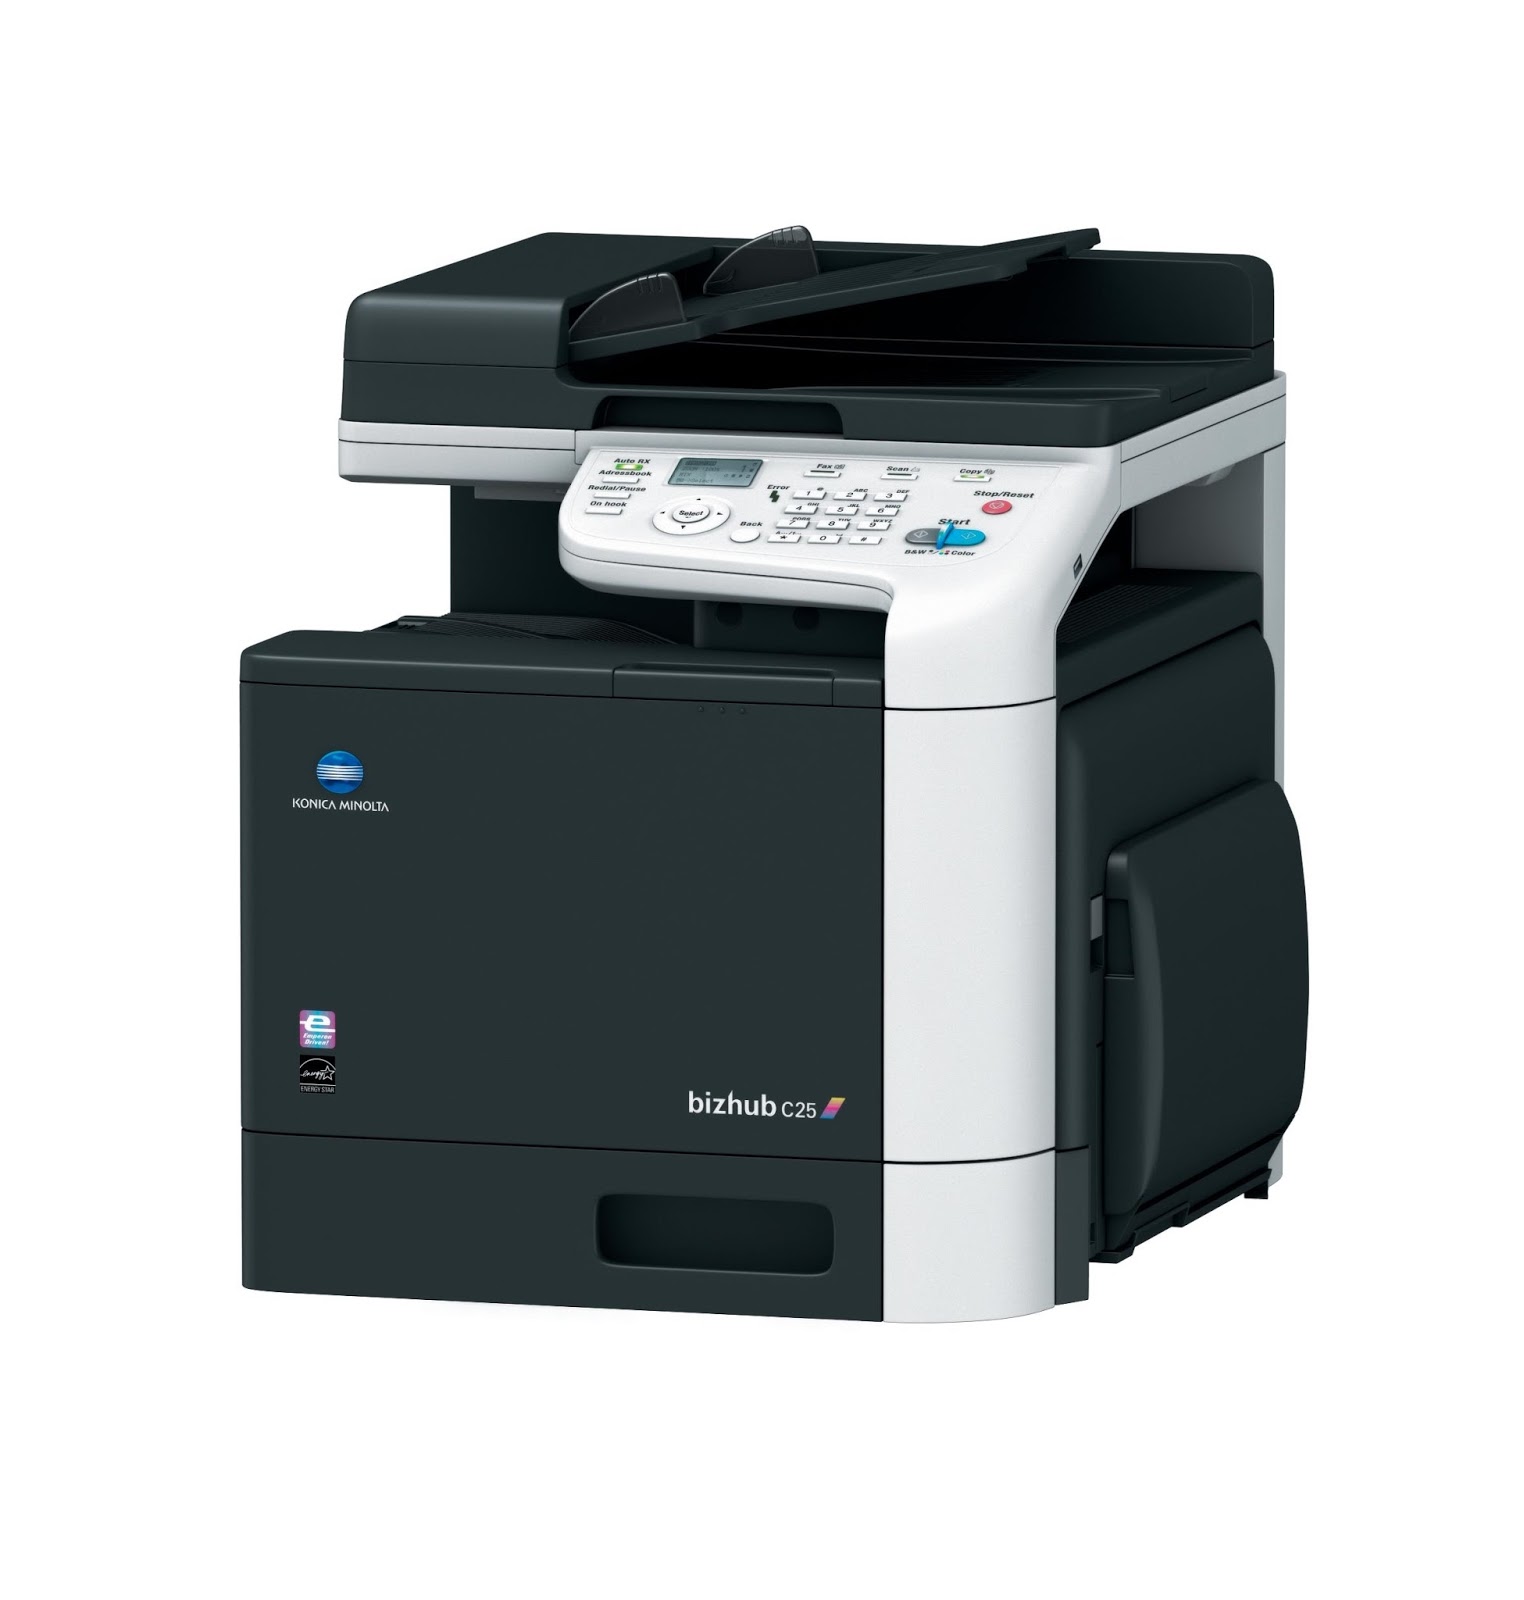 Konica Minolta Bizhub C280 Driver / Konica Minolta Bizhub C280 Color Photocopier | konica ... - If you still haven't found answers to your problem, visit our technical videos pages to get more help or contact us for more assistance.